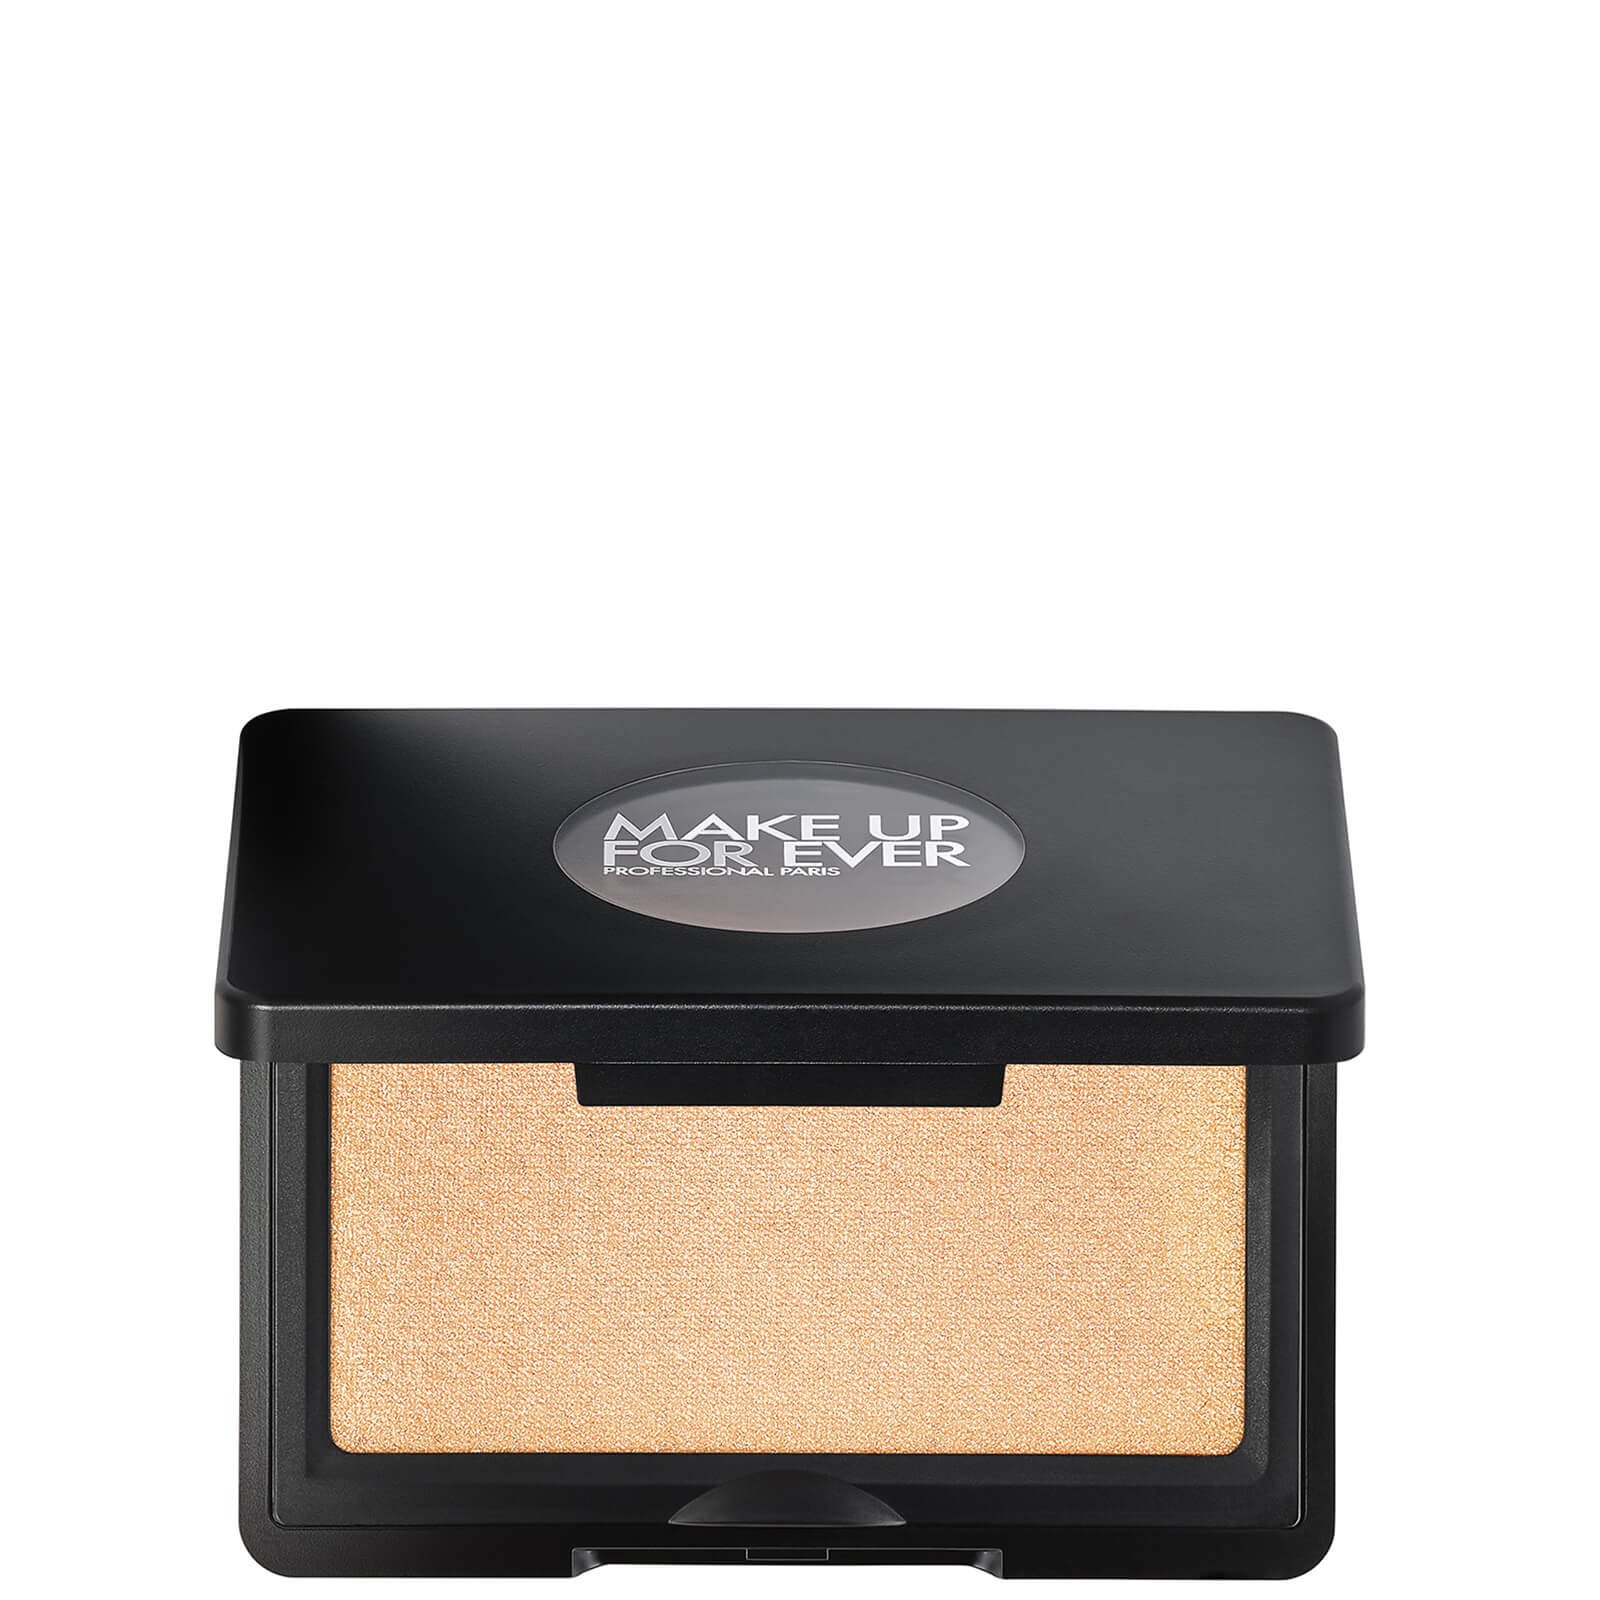 MAKE UP FOR EVER Artist Face Powders Highlighter 4g (Various Shades) - H110 - Anywhere Glimmer